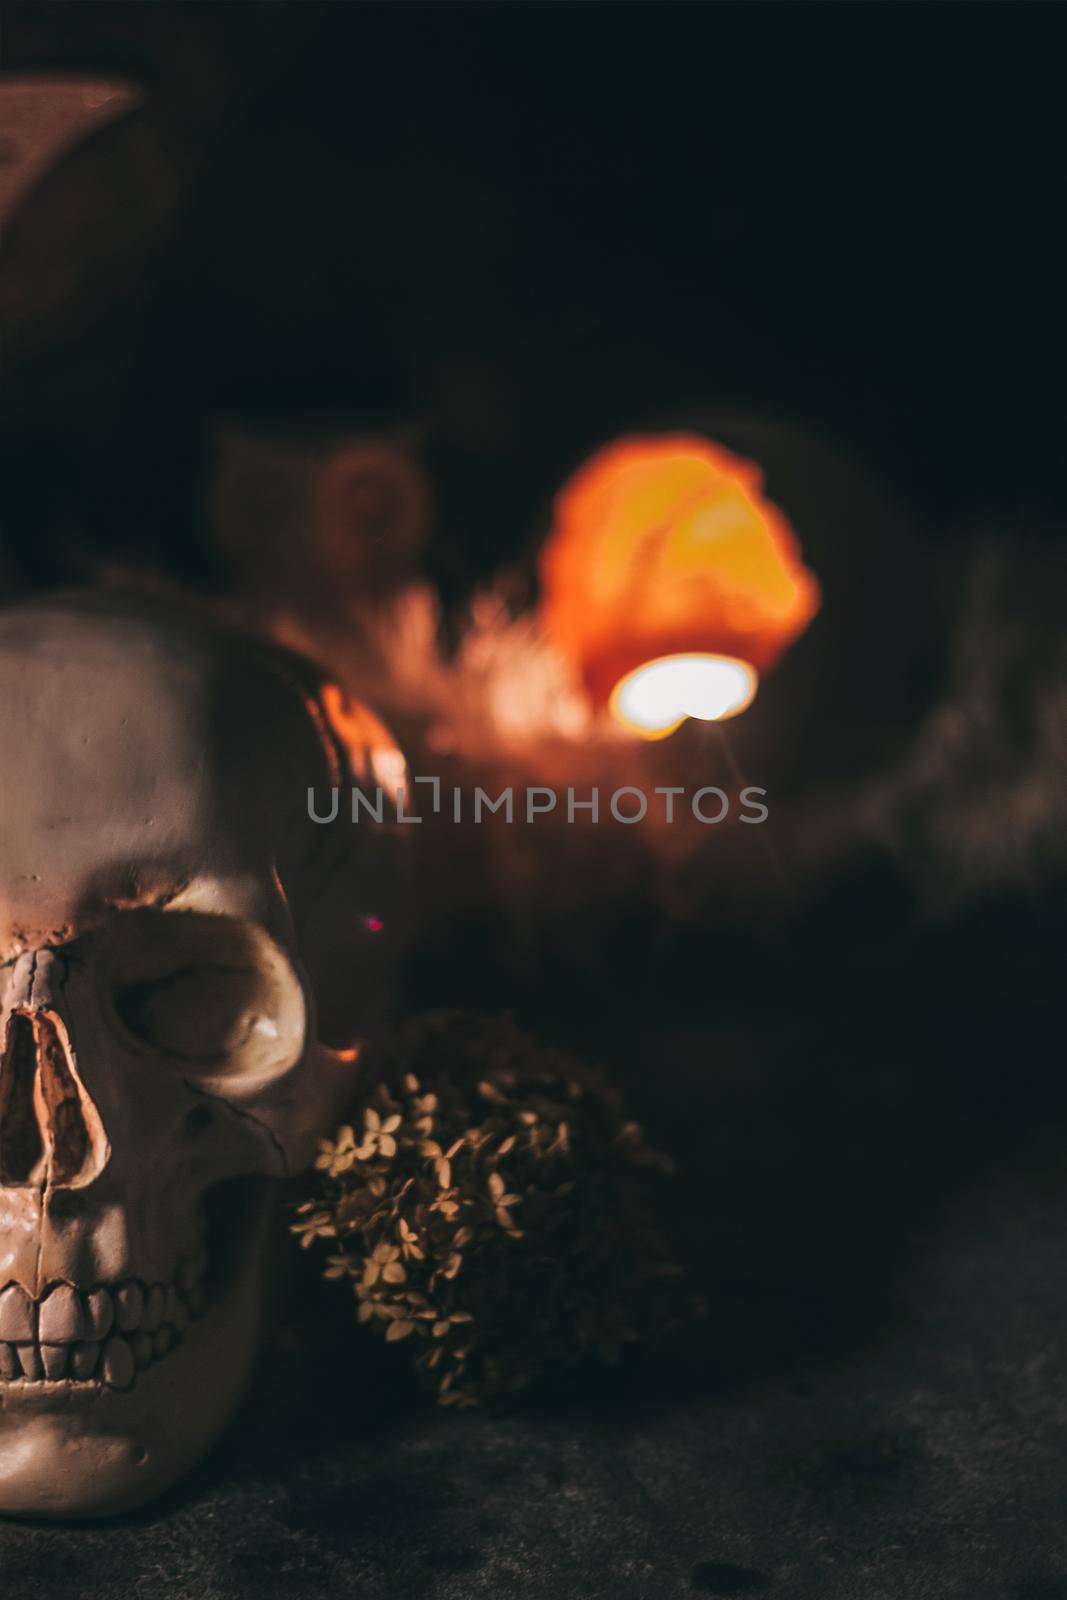 Occult mystic ritual halloween witchcraft scene - human scull, candles, dried flowers, moon and owl by mmp1206